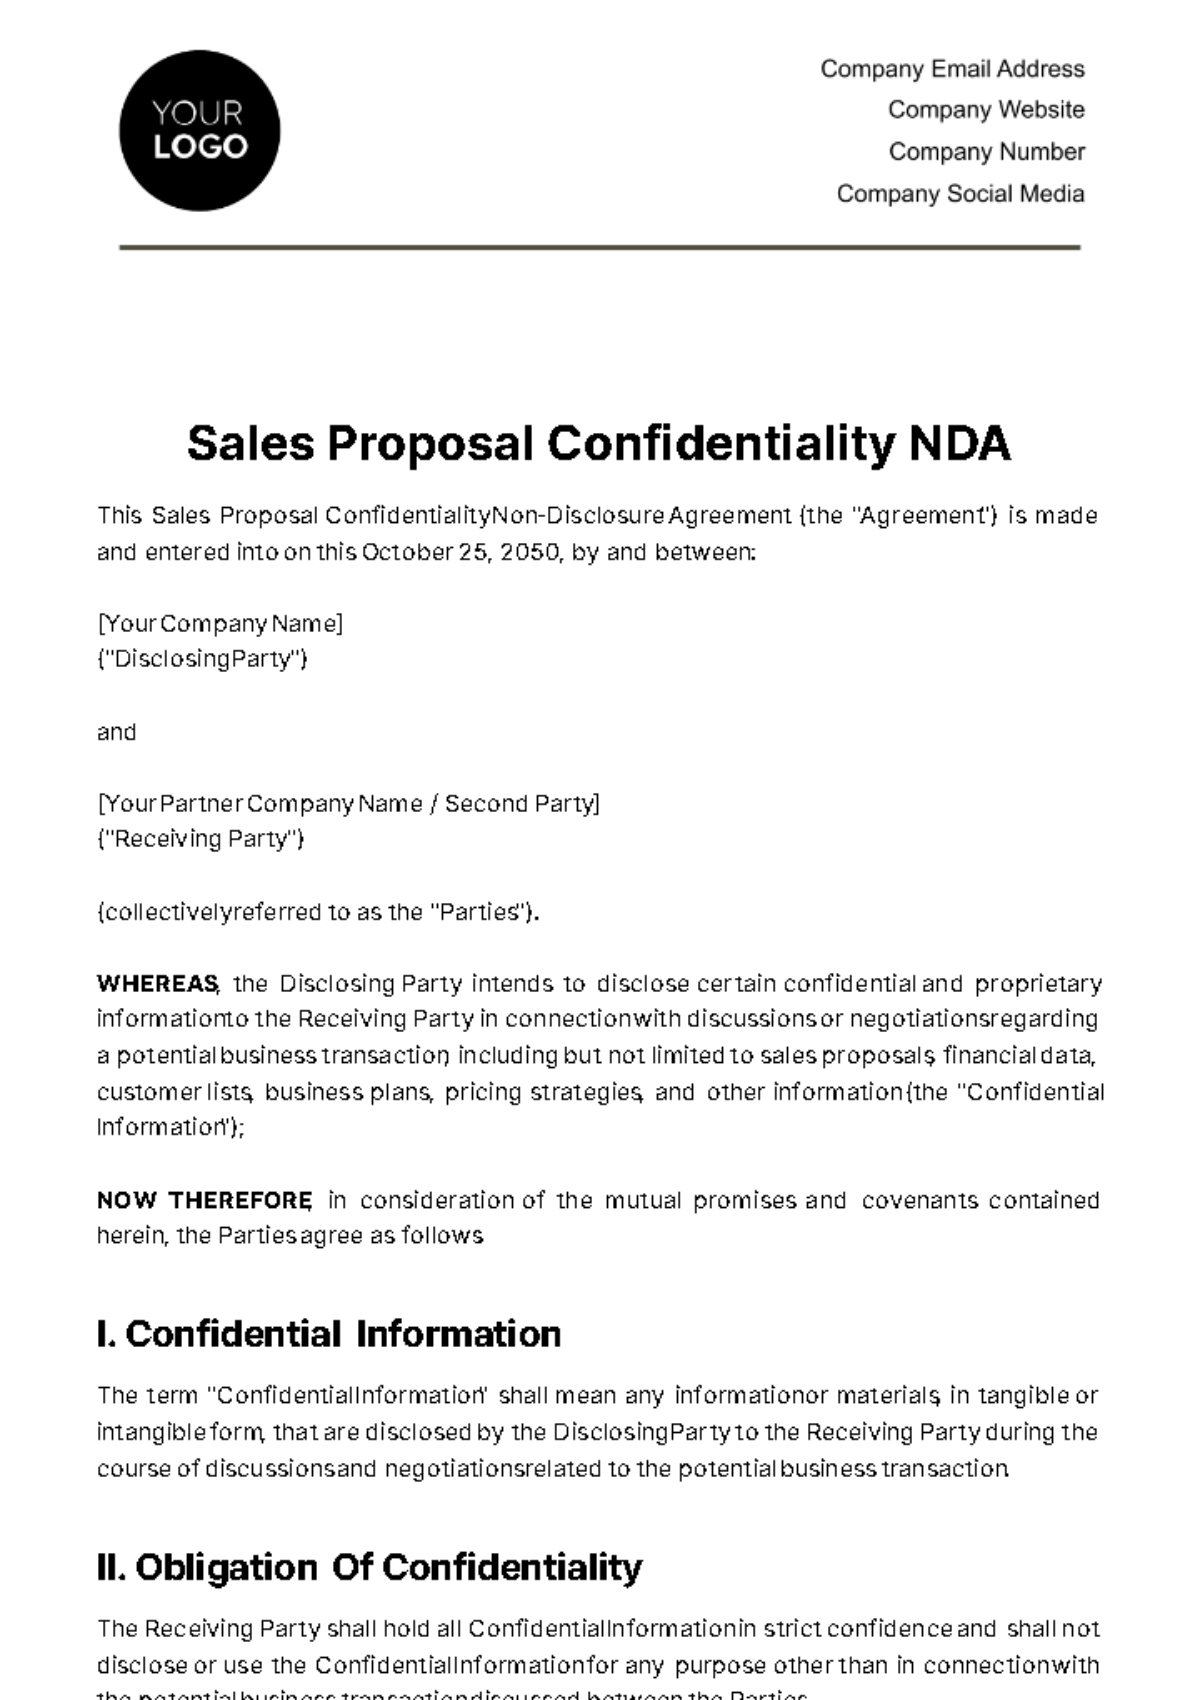 Sales Proposal Confidentiality NDA Template